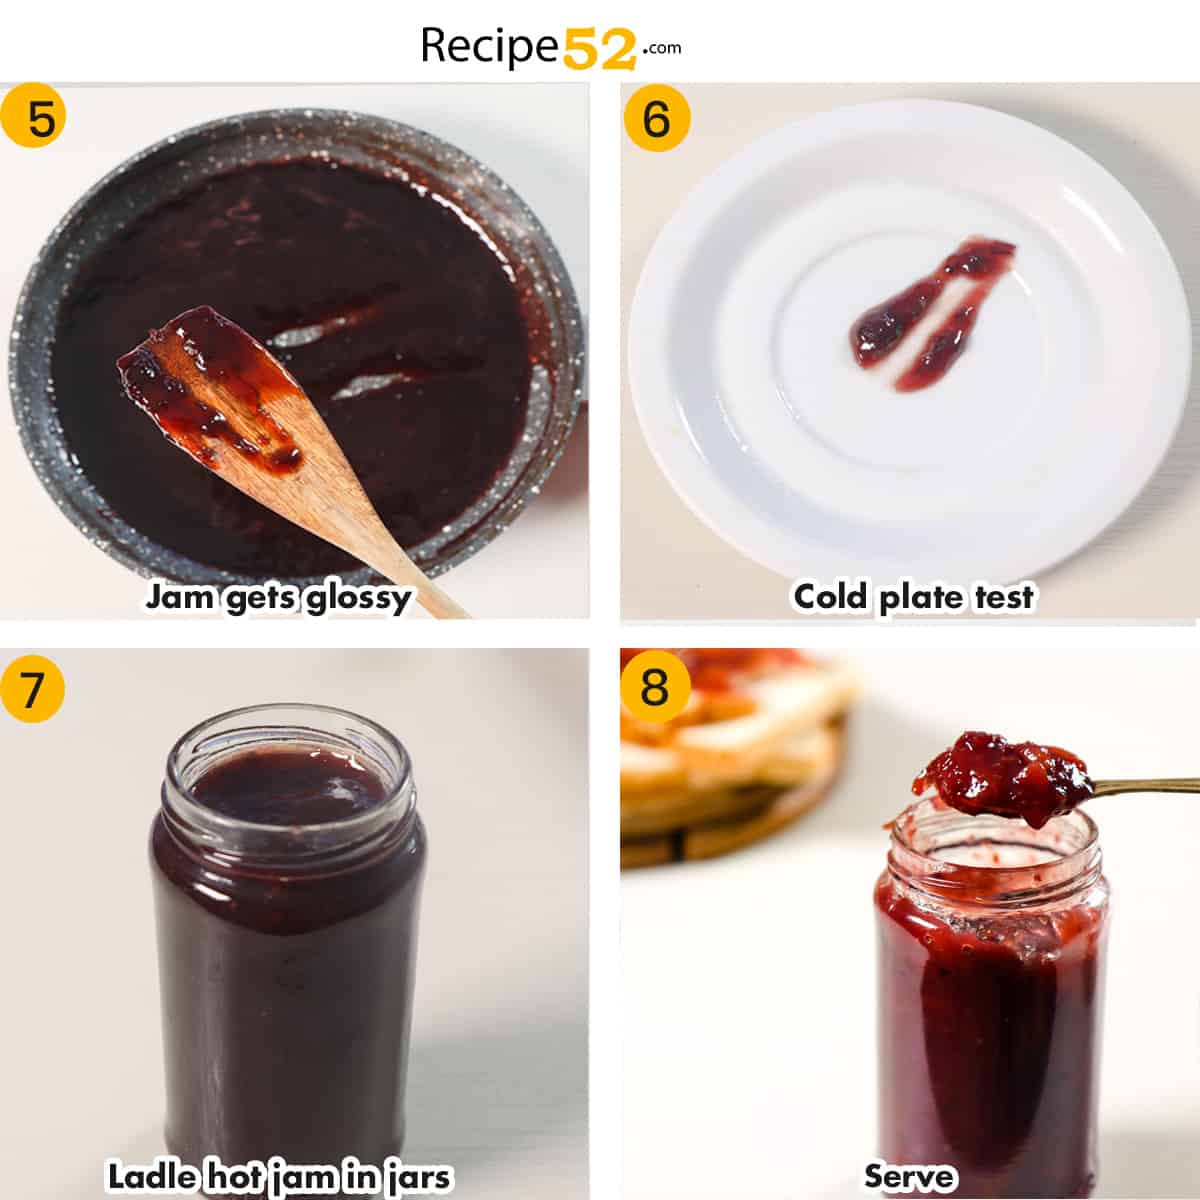 Steps to make jam and test it.